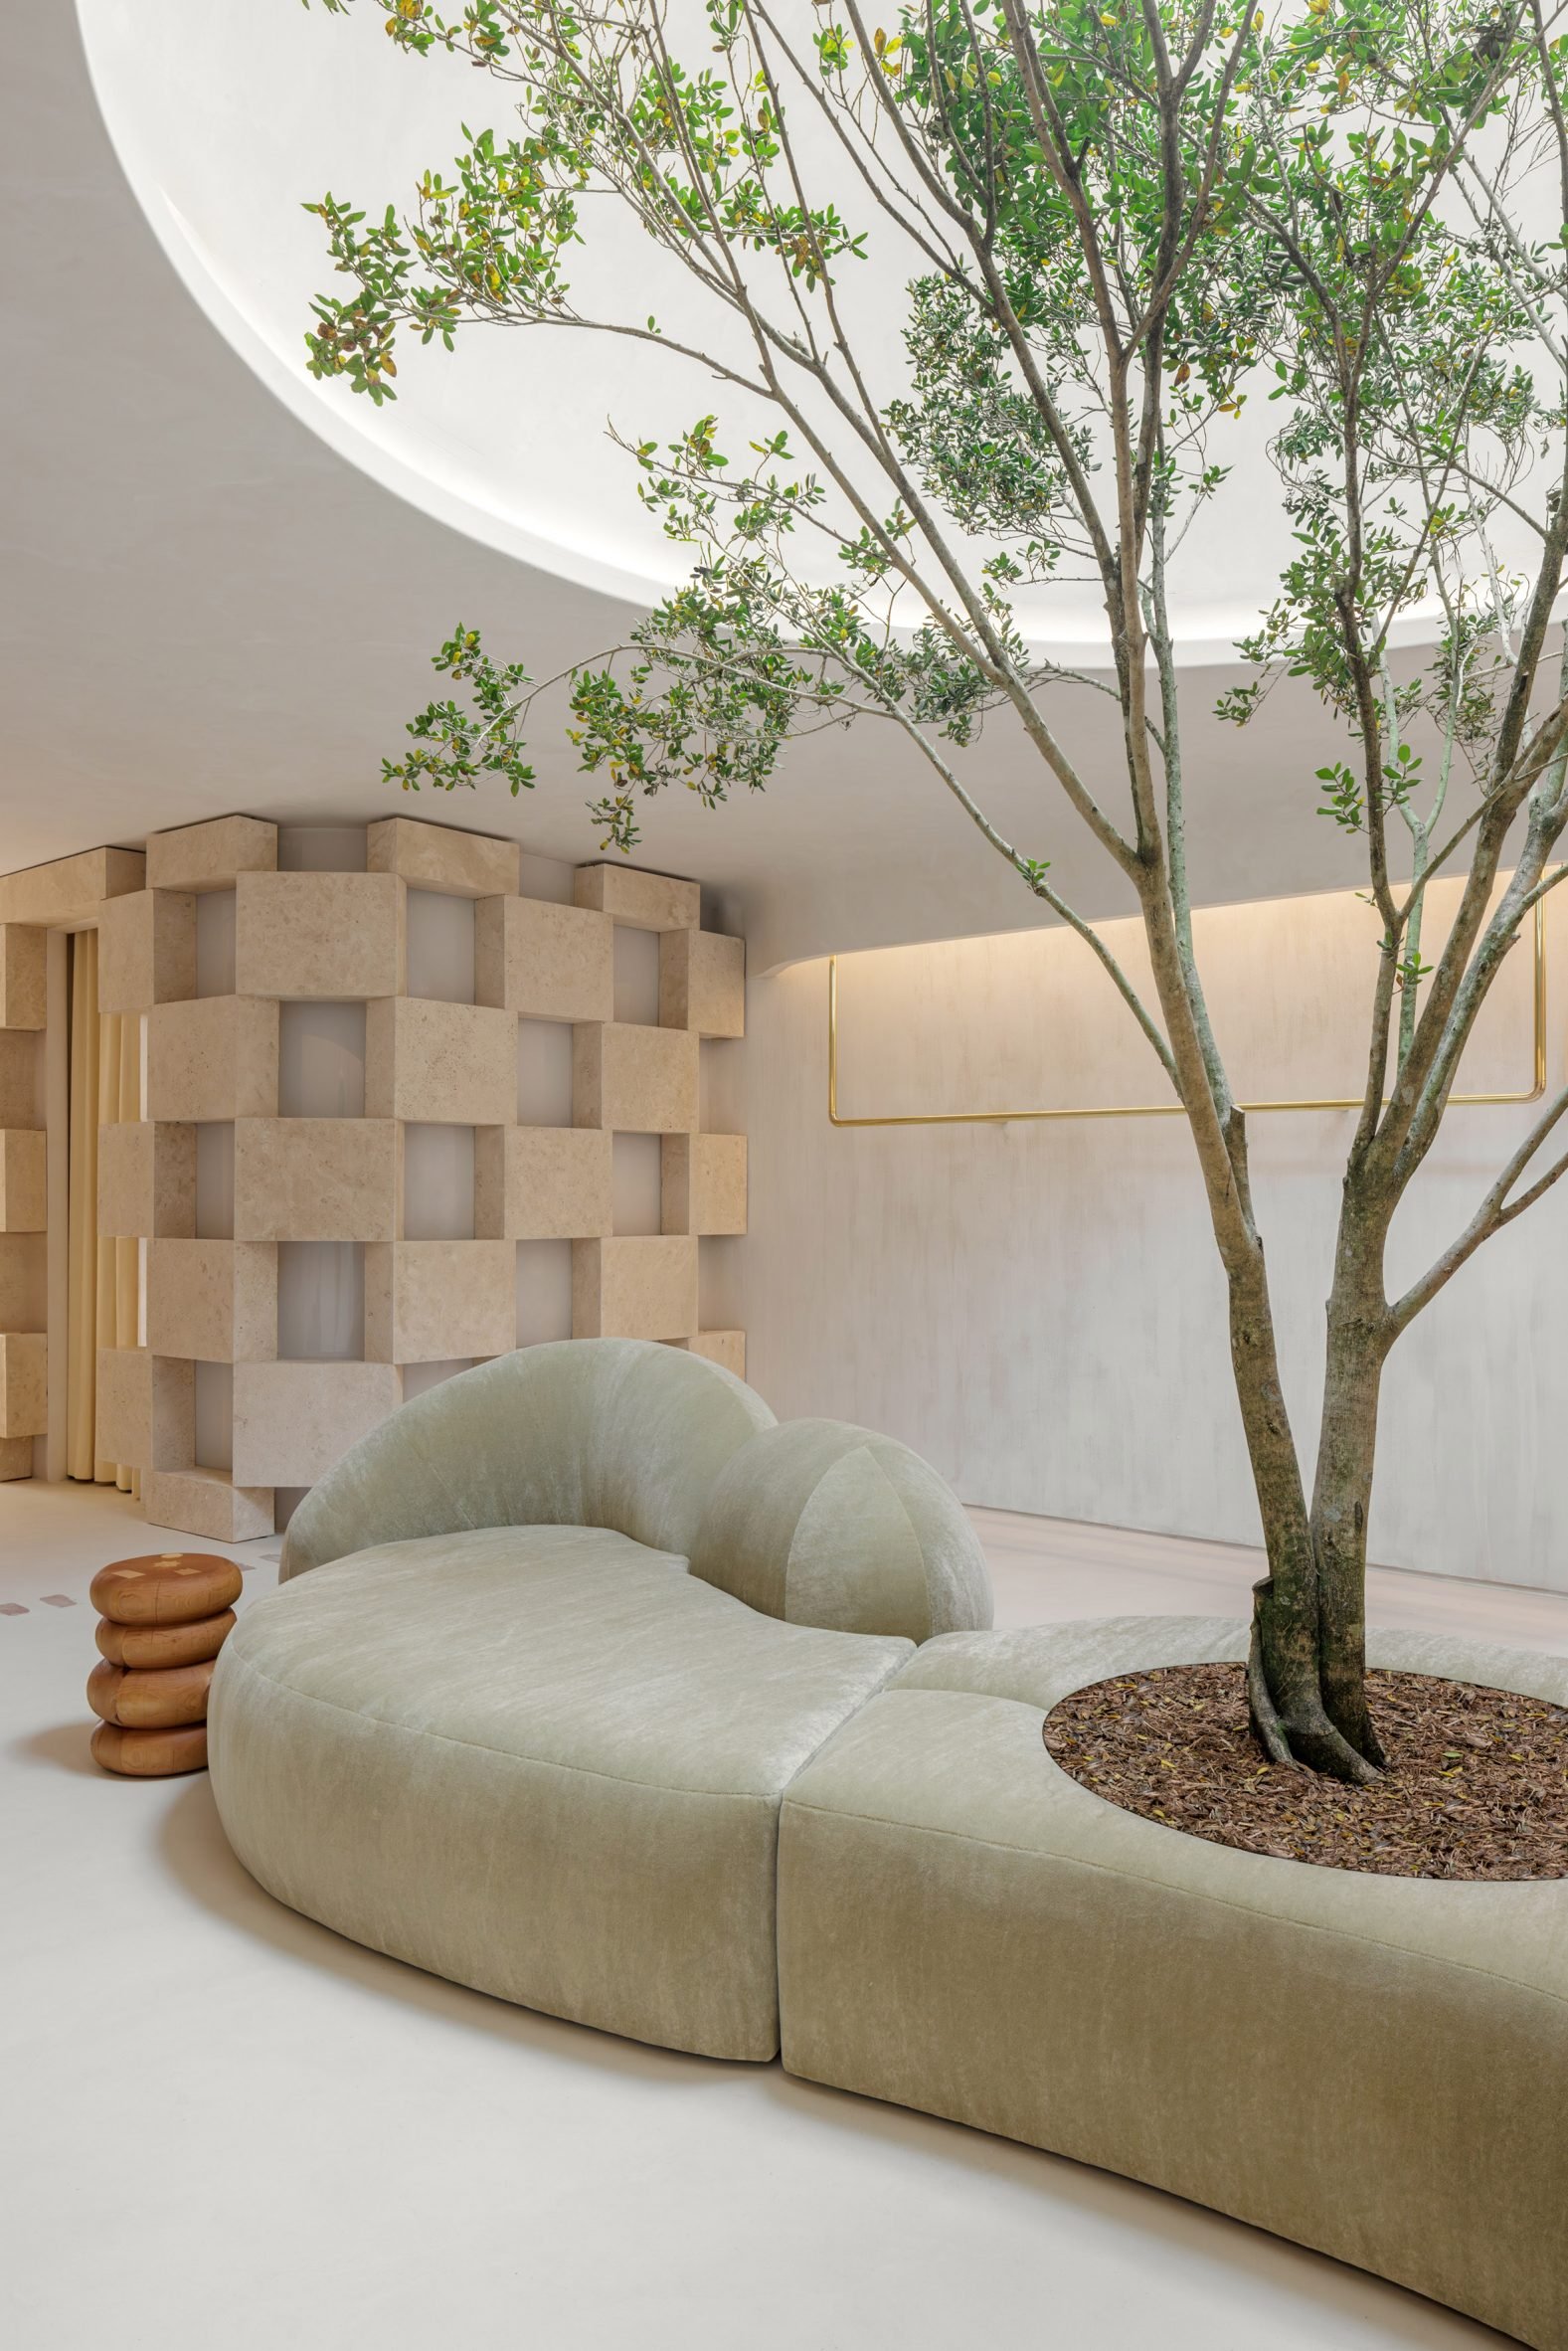 A banyan tree growing from a pale-green sofa